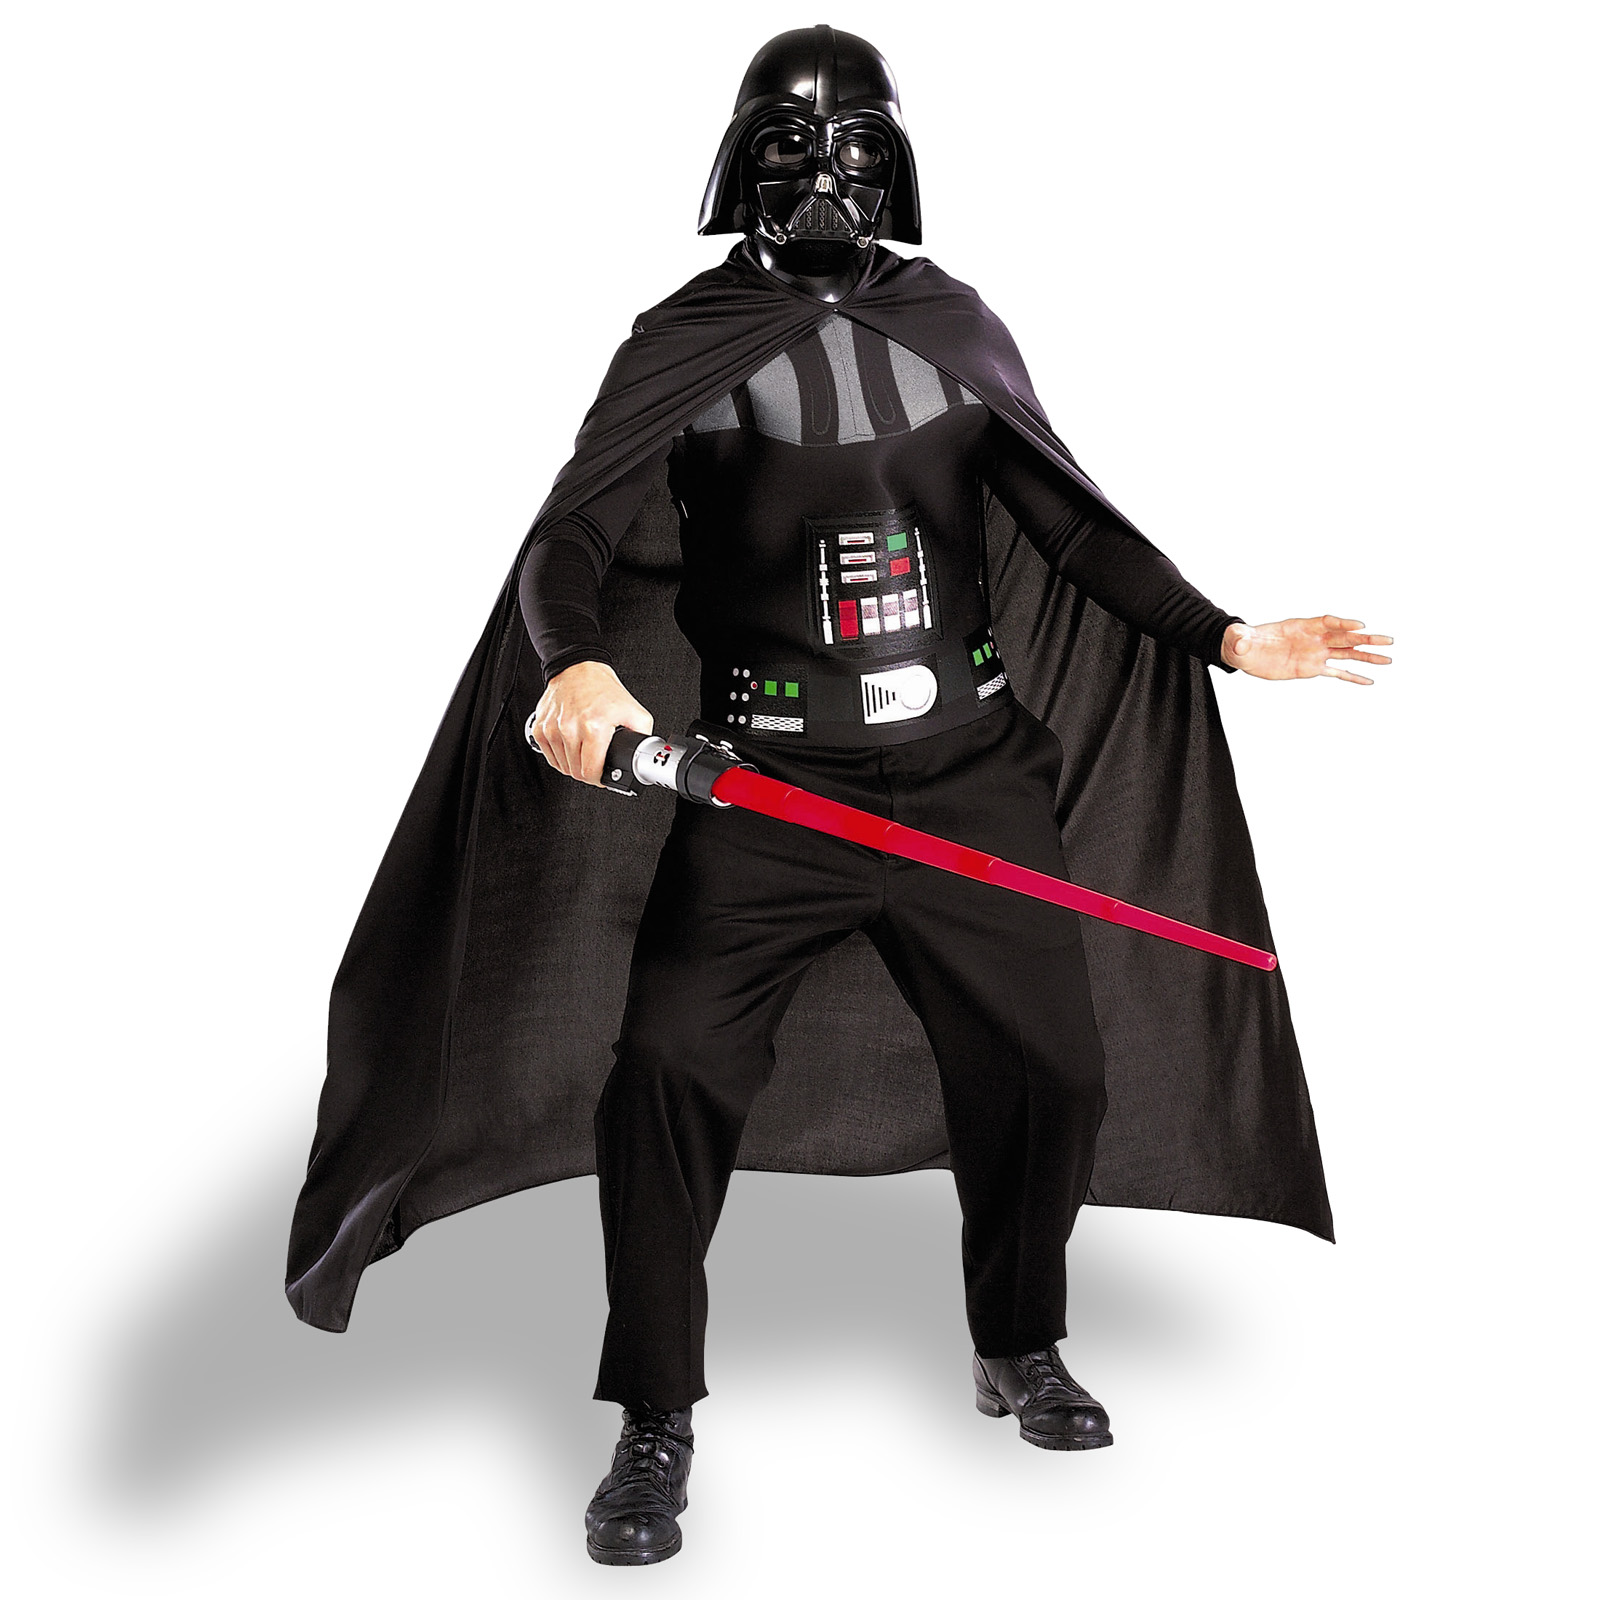 Star Wars - Darth Vader Costume for Adults